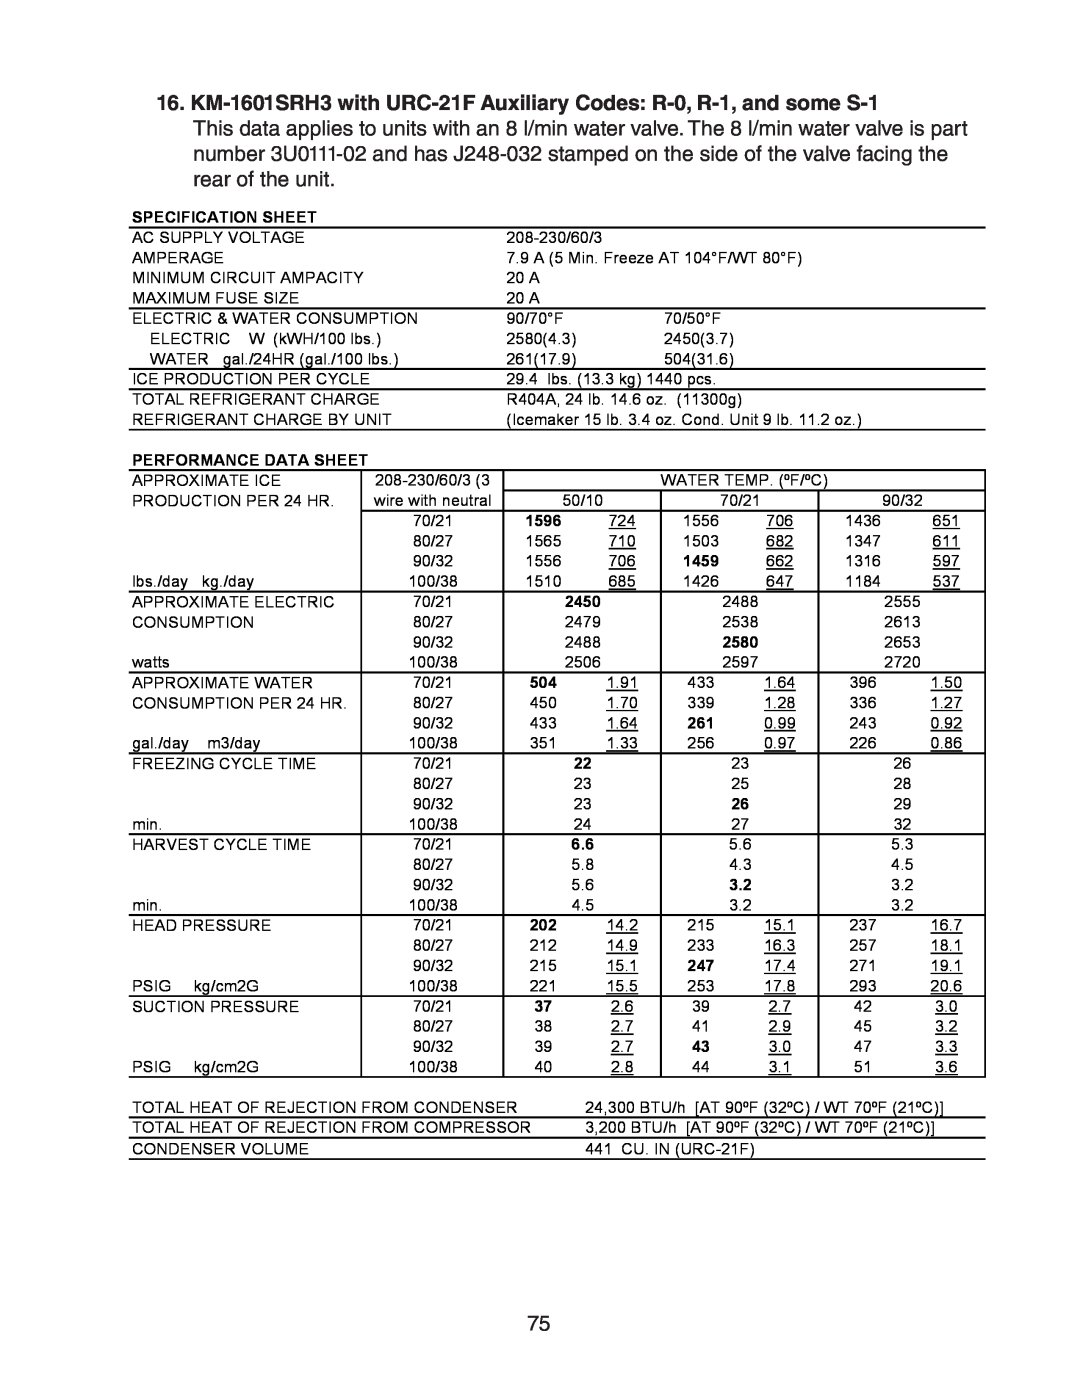 Hoshizaki SWH3-M KM-1601SAH/3, SRH/3 KM-1601SRH3 with URC-21F Auxiliary Codes R-0, R-1, and some S-1, Specification Sheet 